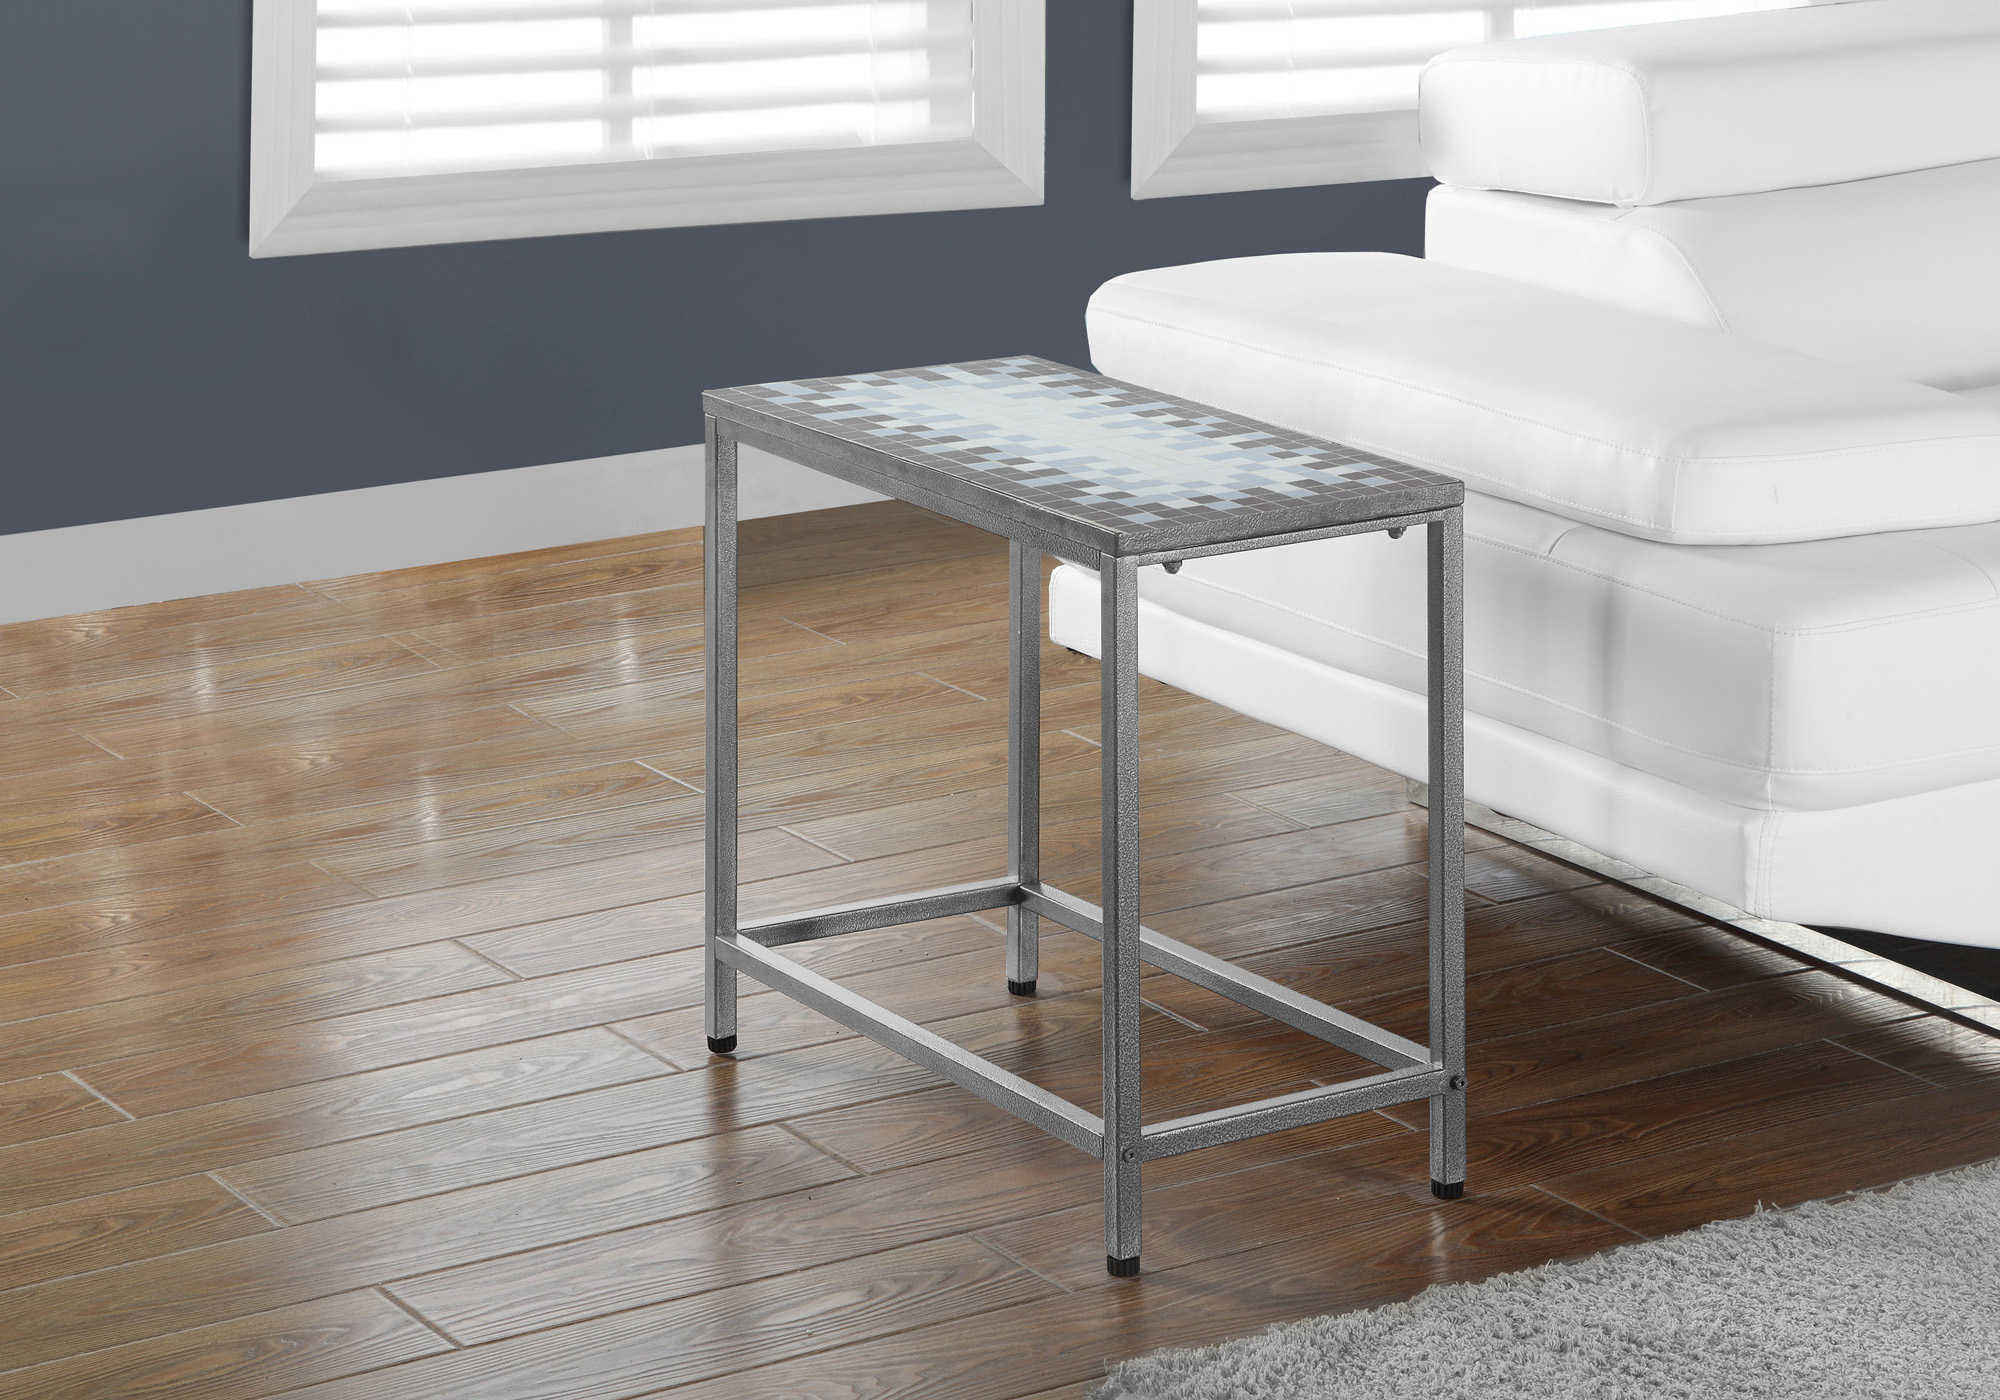 ACCENT TABLE - GREY / BLUE TILE TOP / HAMMERED SILVER 